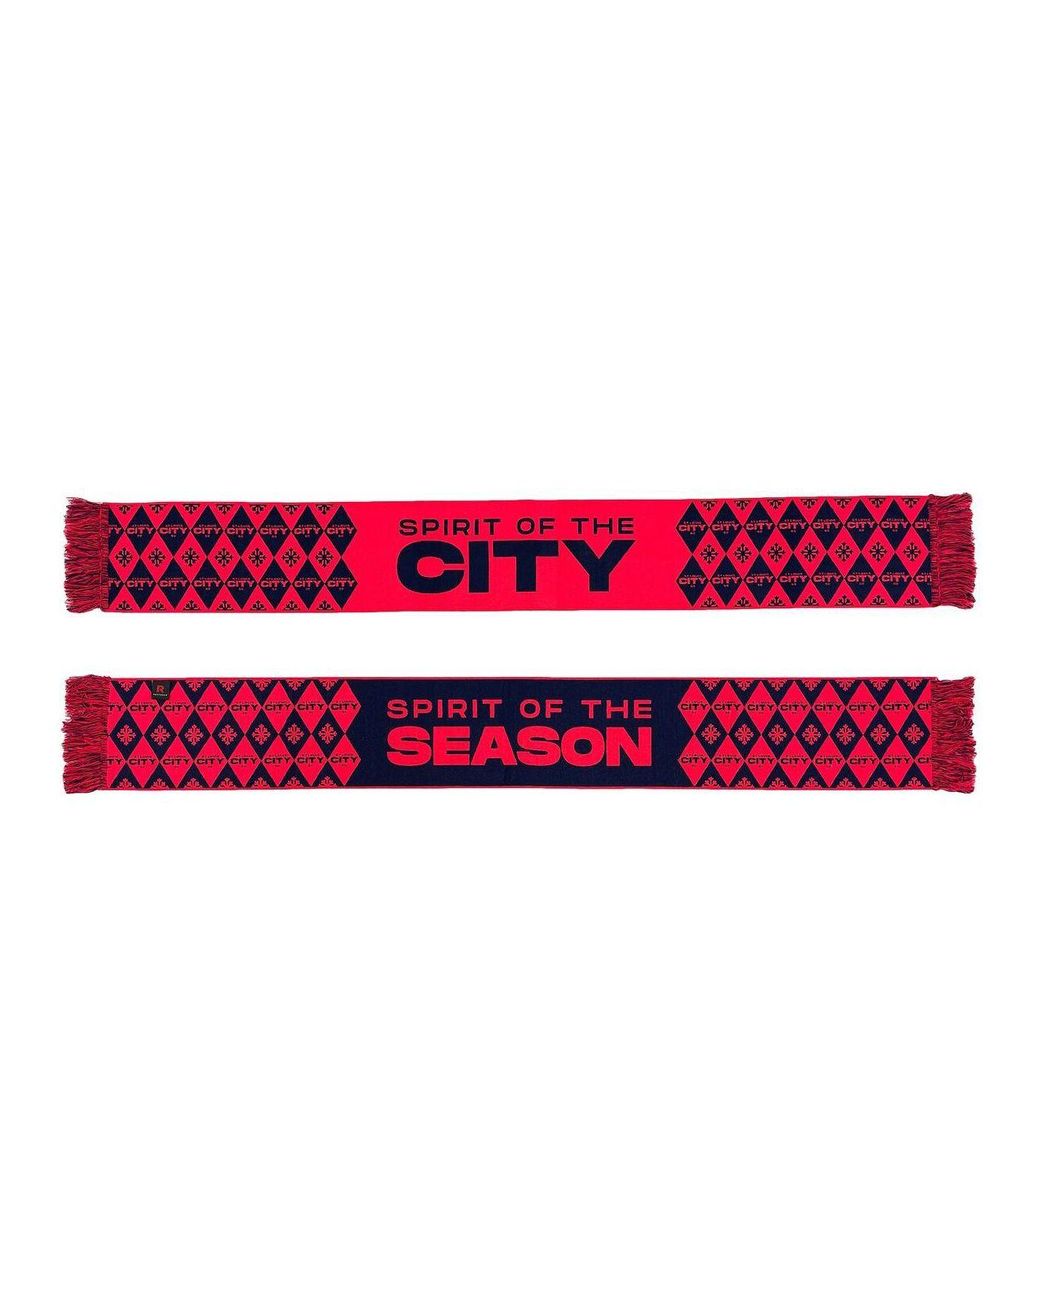 ST. LOUIS CITY SC SCARF - Soccer Capital – Ruffneck Scarves